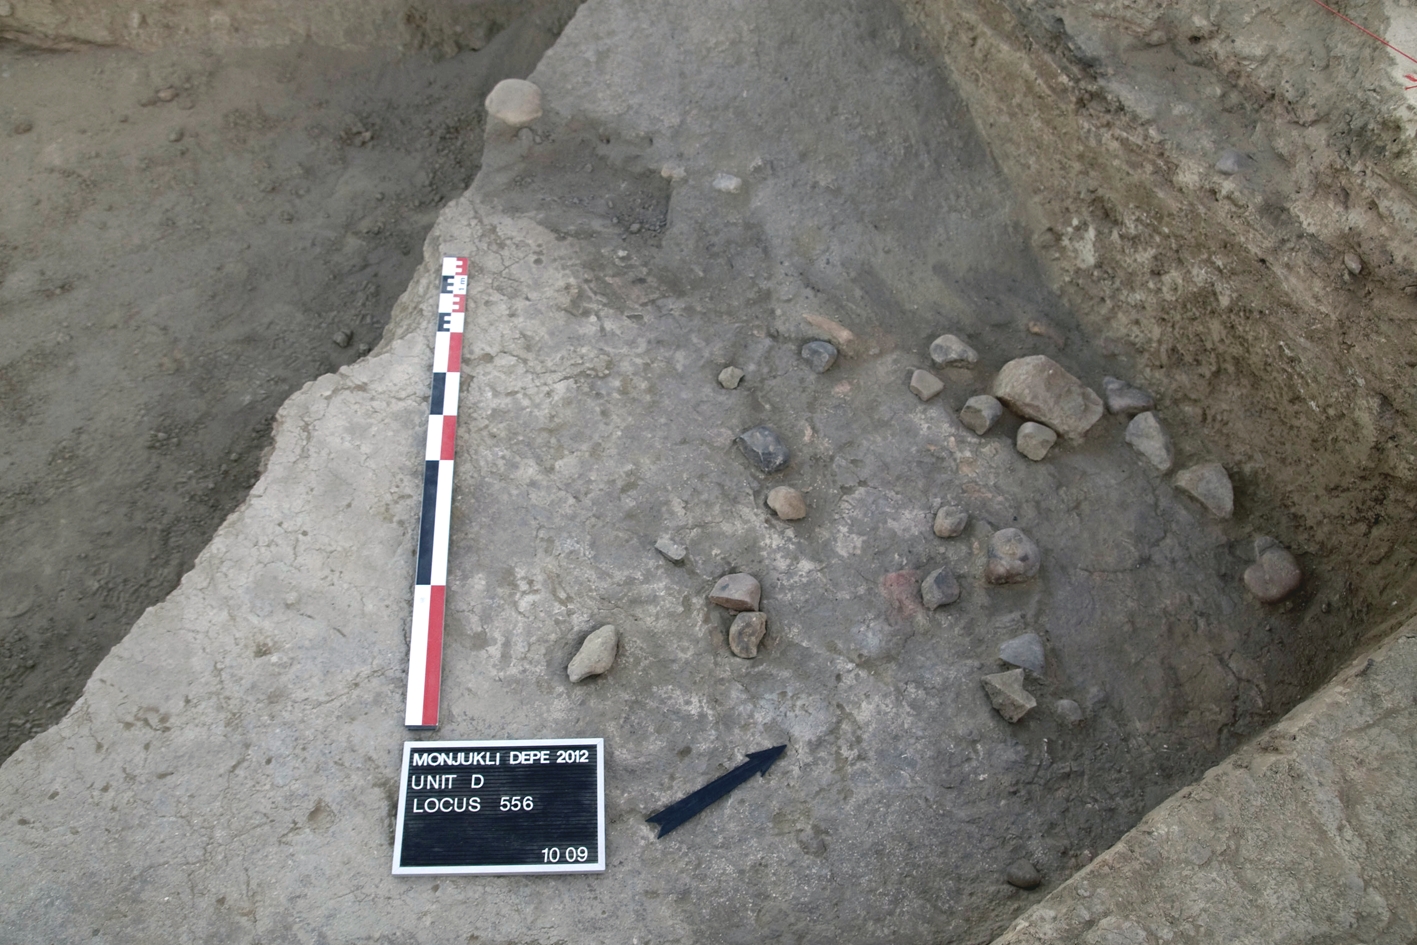 Stones scattered on the last floor in House 10. The practice of strewing stones on the floor prior to the abandonment of a house may have been part of a “closing ritual.” It was attested in three of the excavated houses at Monjukli Depe.